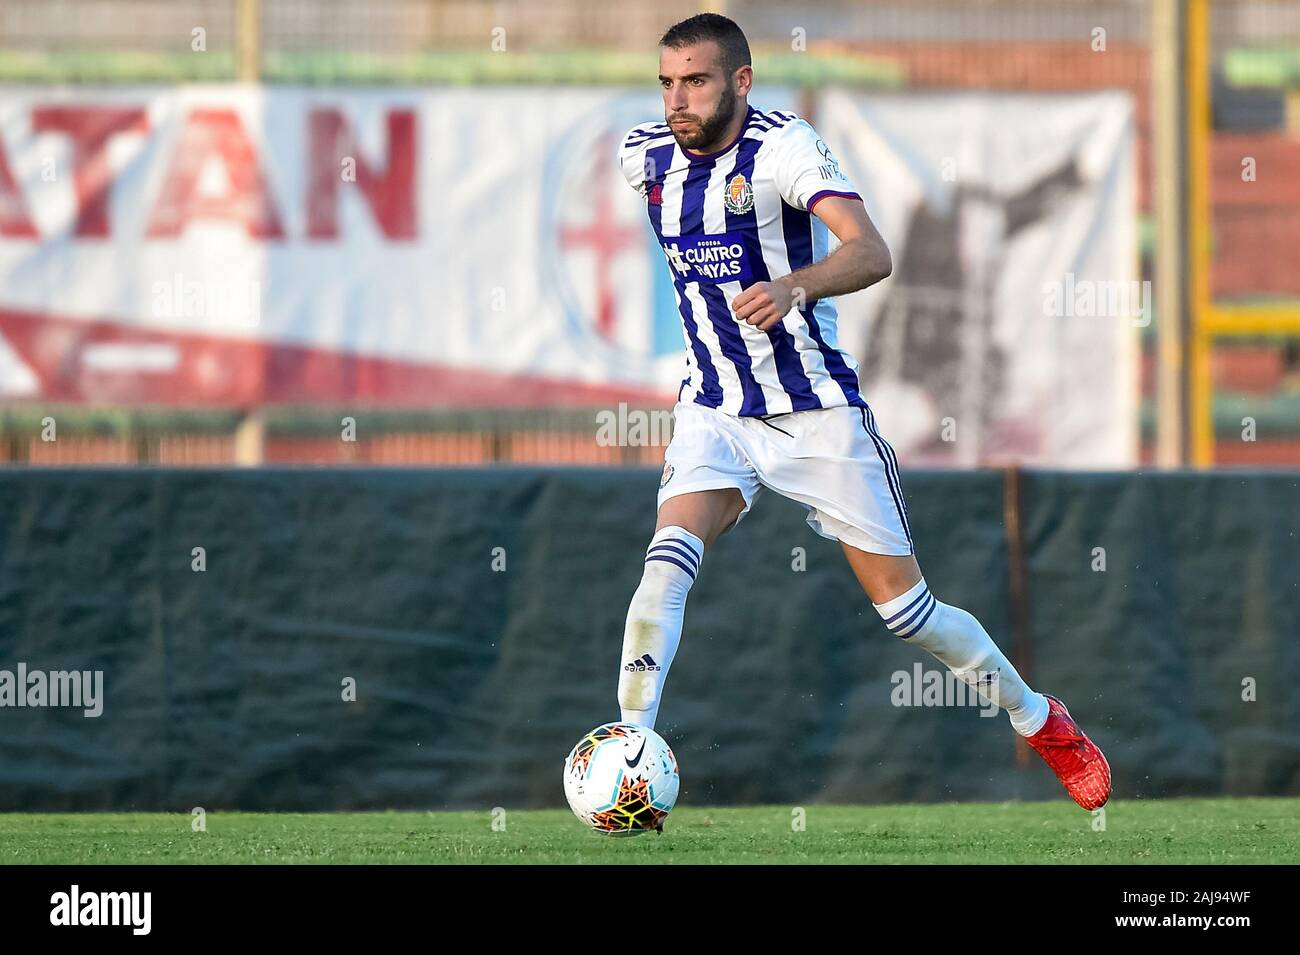 Mantua, Italy. 10 August, 2019: Antonito of Real Valladolid CF in action during the pre-season friendly football match between Brescia Calcio and Real Valladolid CF. Brescia Calcio won 2-1 over Real Valladolid CF. Credit: Nicolò Campo/Alamy Live News Stock Photo